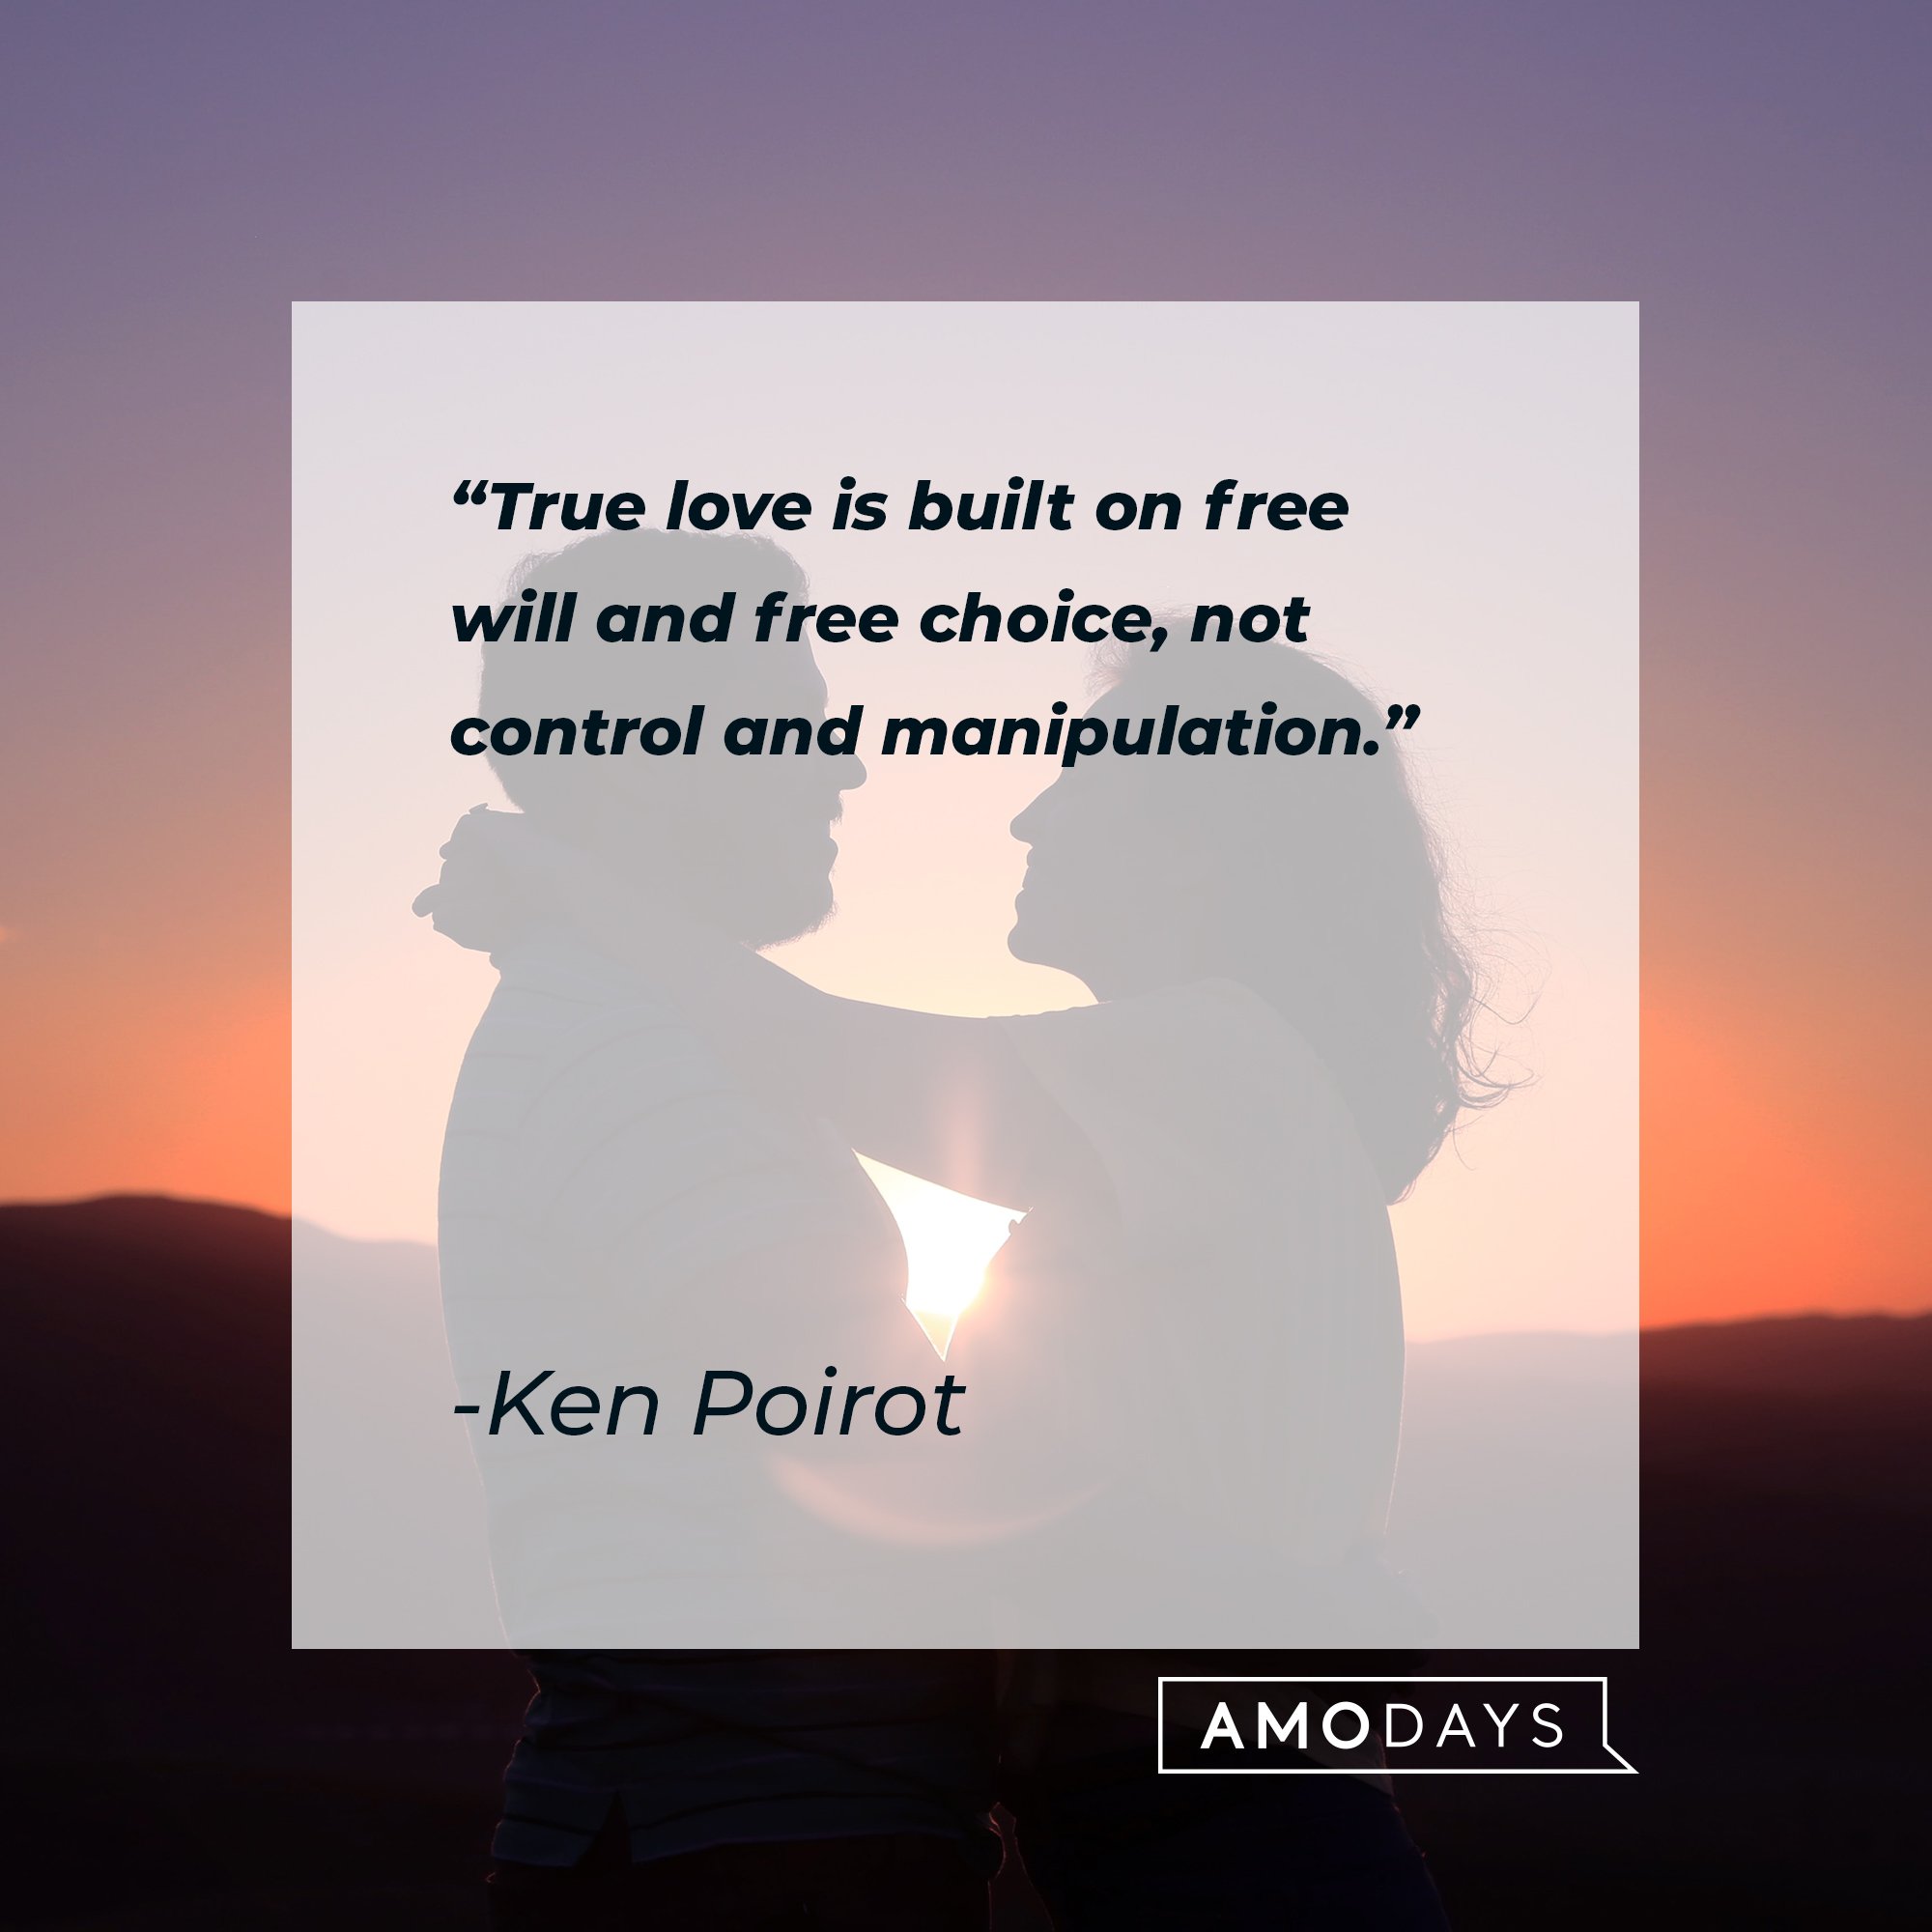 Ken Poirot's quote: "True love is built on free will and free choice, not control and manipulation." | Image:  AmoDays